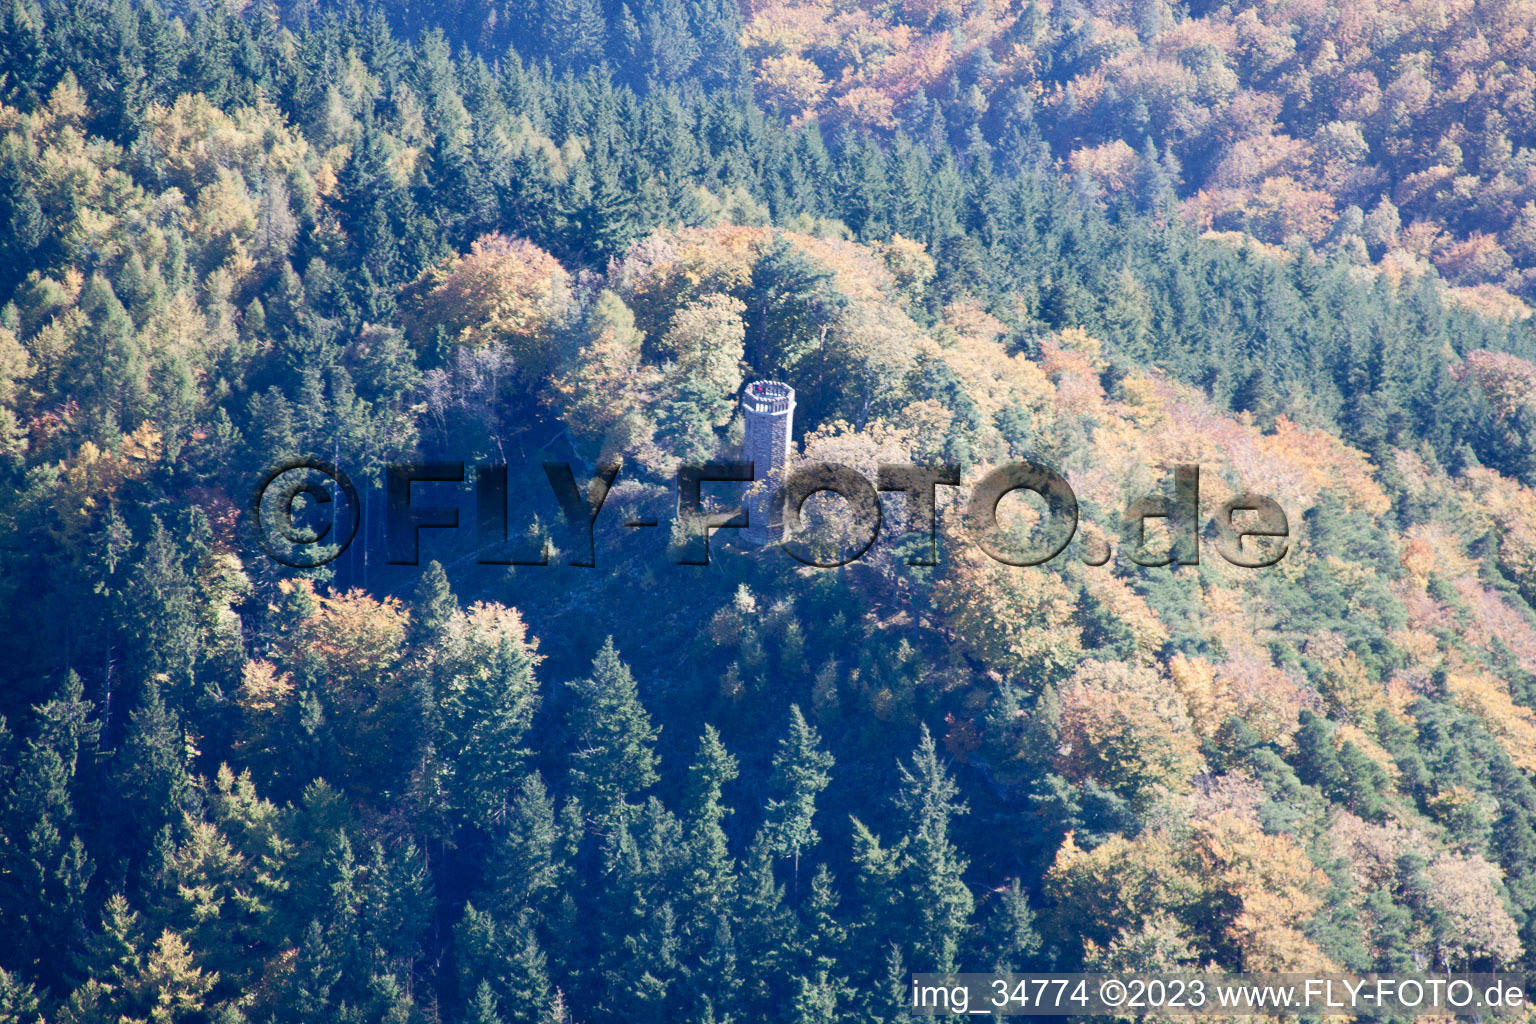 Aerial view of Rehberg tower in Waldrohrbach in the state Rhineland-Palatinate, Germany